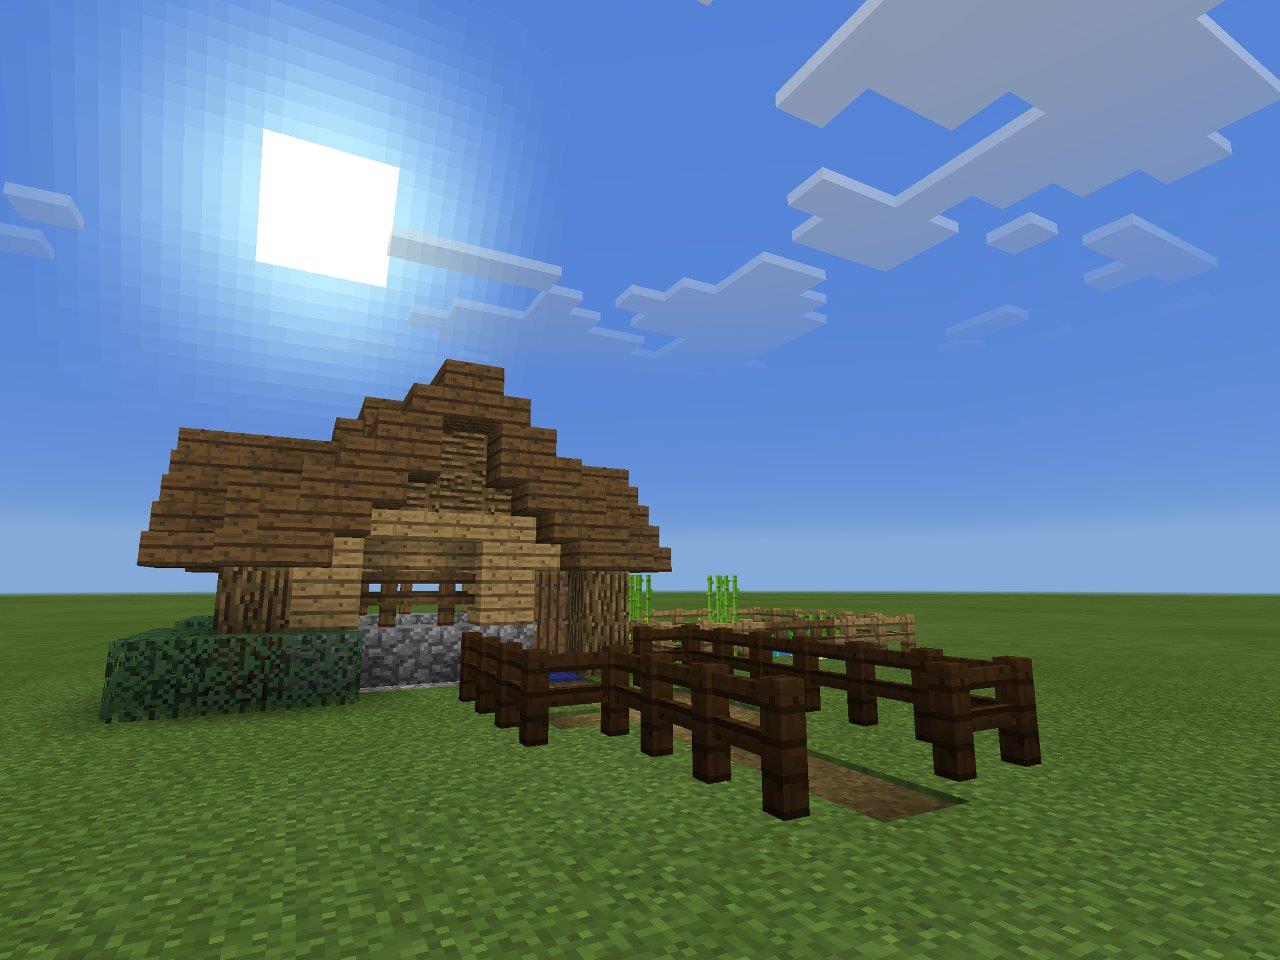 Minecraft log cabin with fence and garden